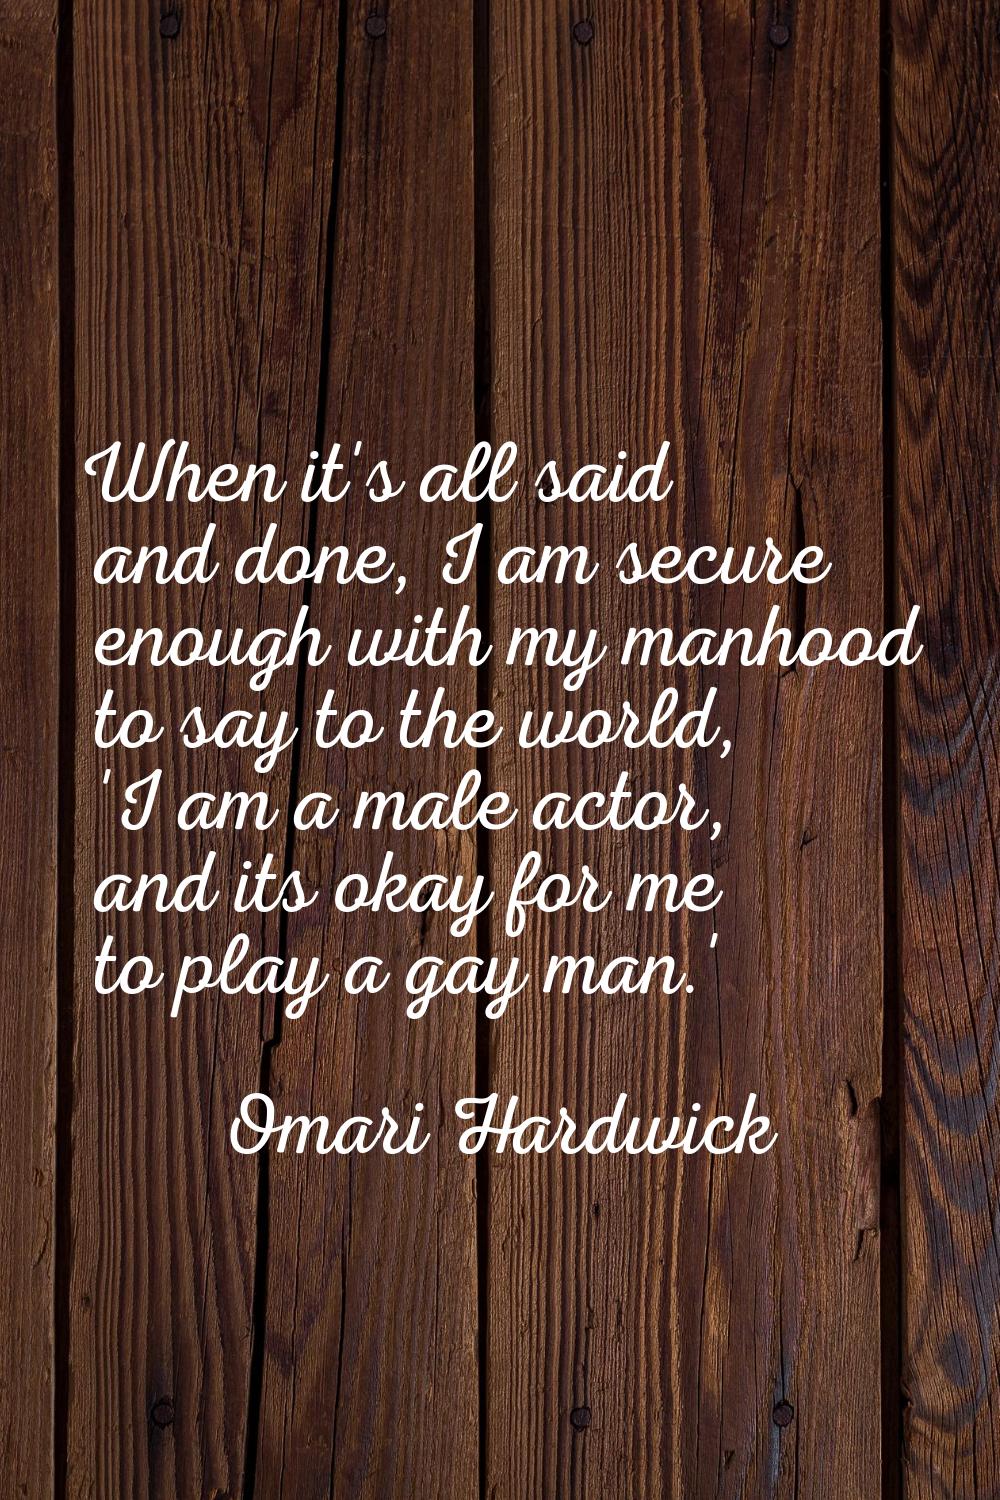 When it's all said and done, I am secure enough with my manhood to say to the world, 'I am a male a